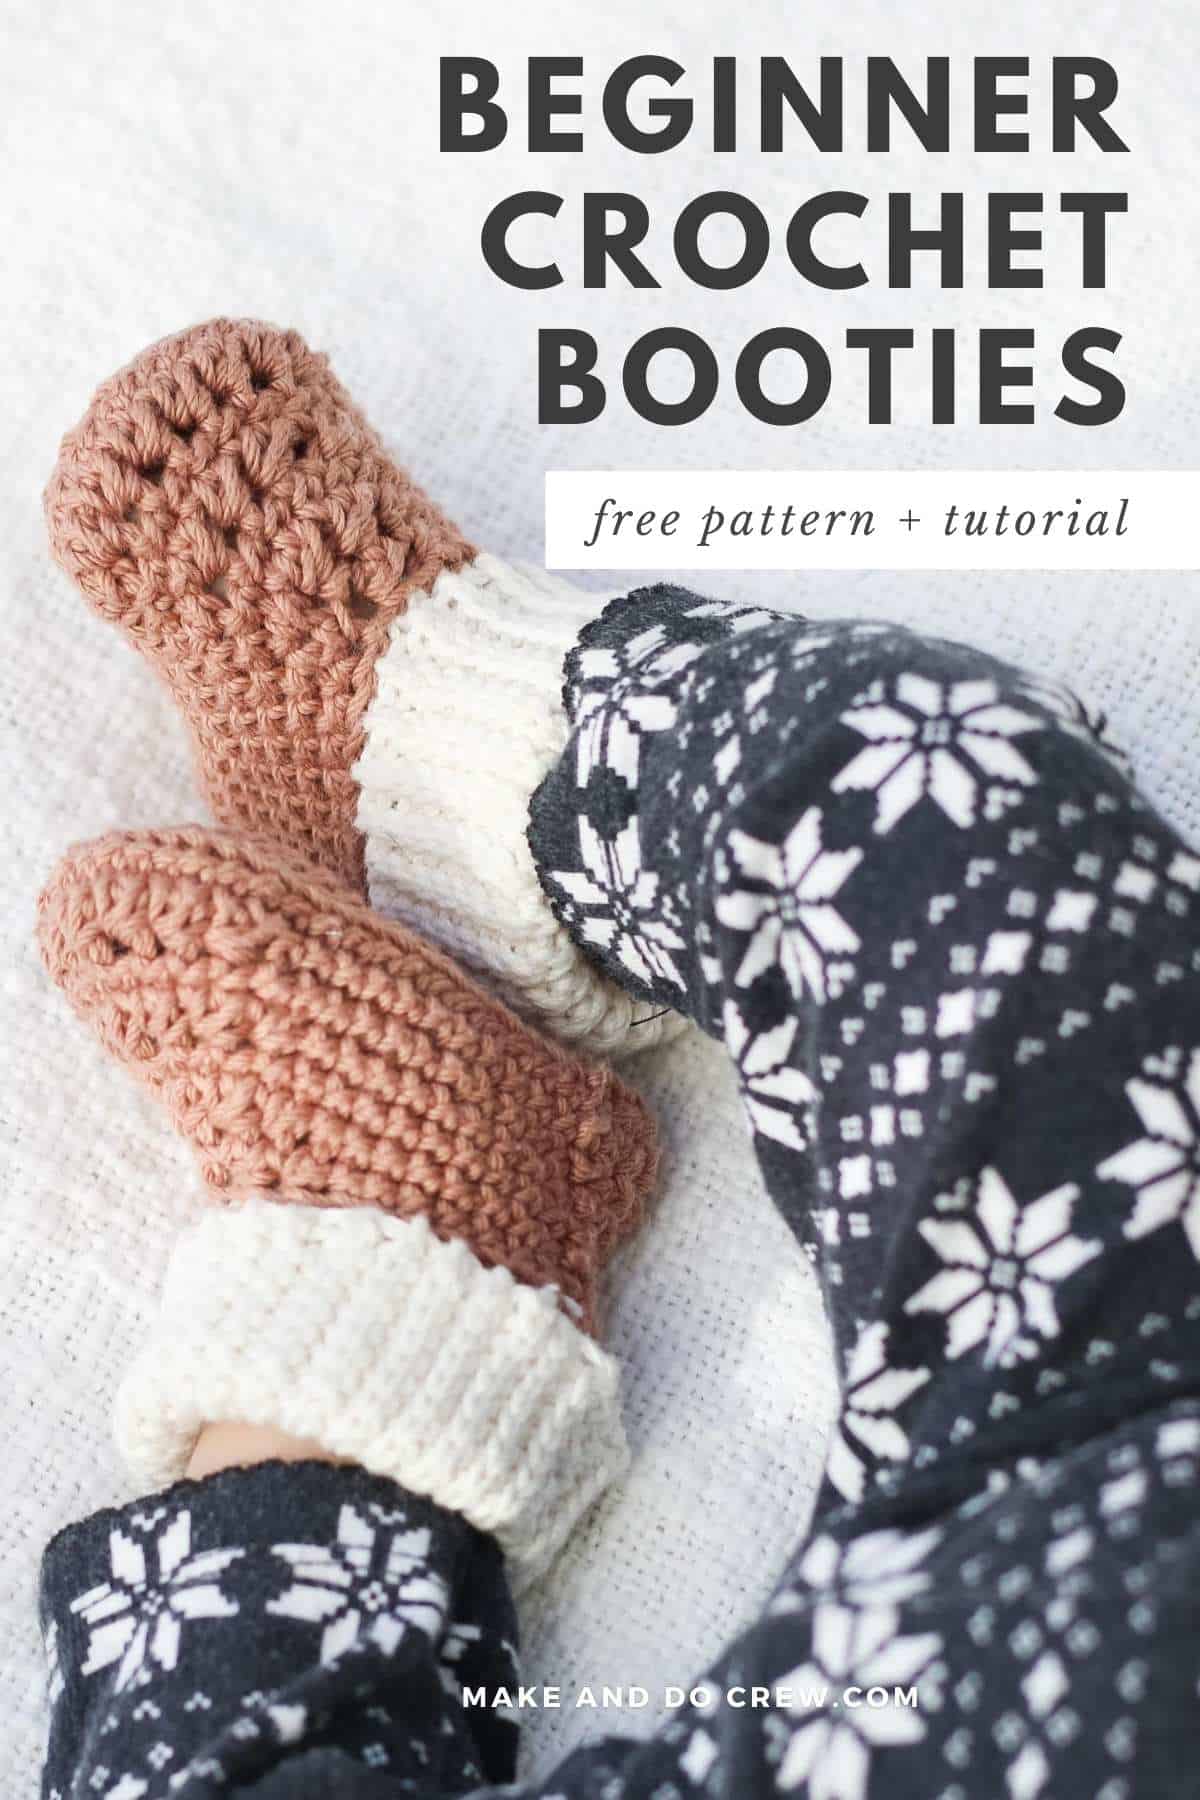 Classic gender neutral crochet booties on a baby's feet.